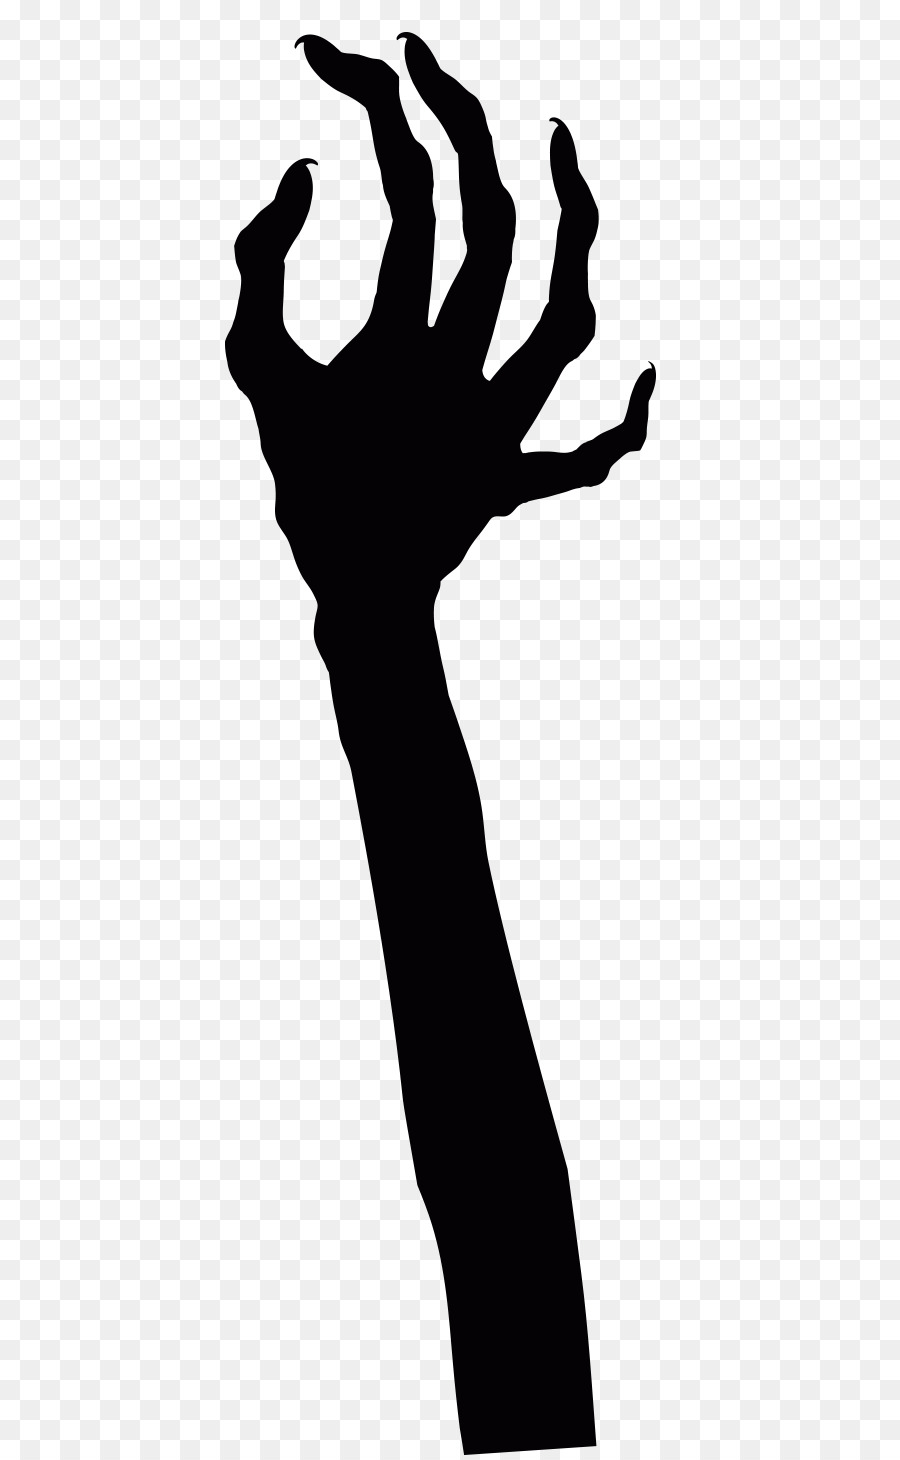 Ghost Devil Claw - Black ghost claws png download - 549*1455 - Free Transparent Ghost png Download.